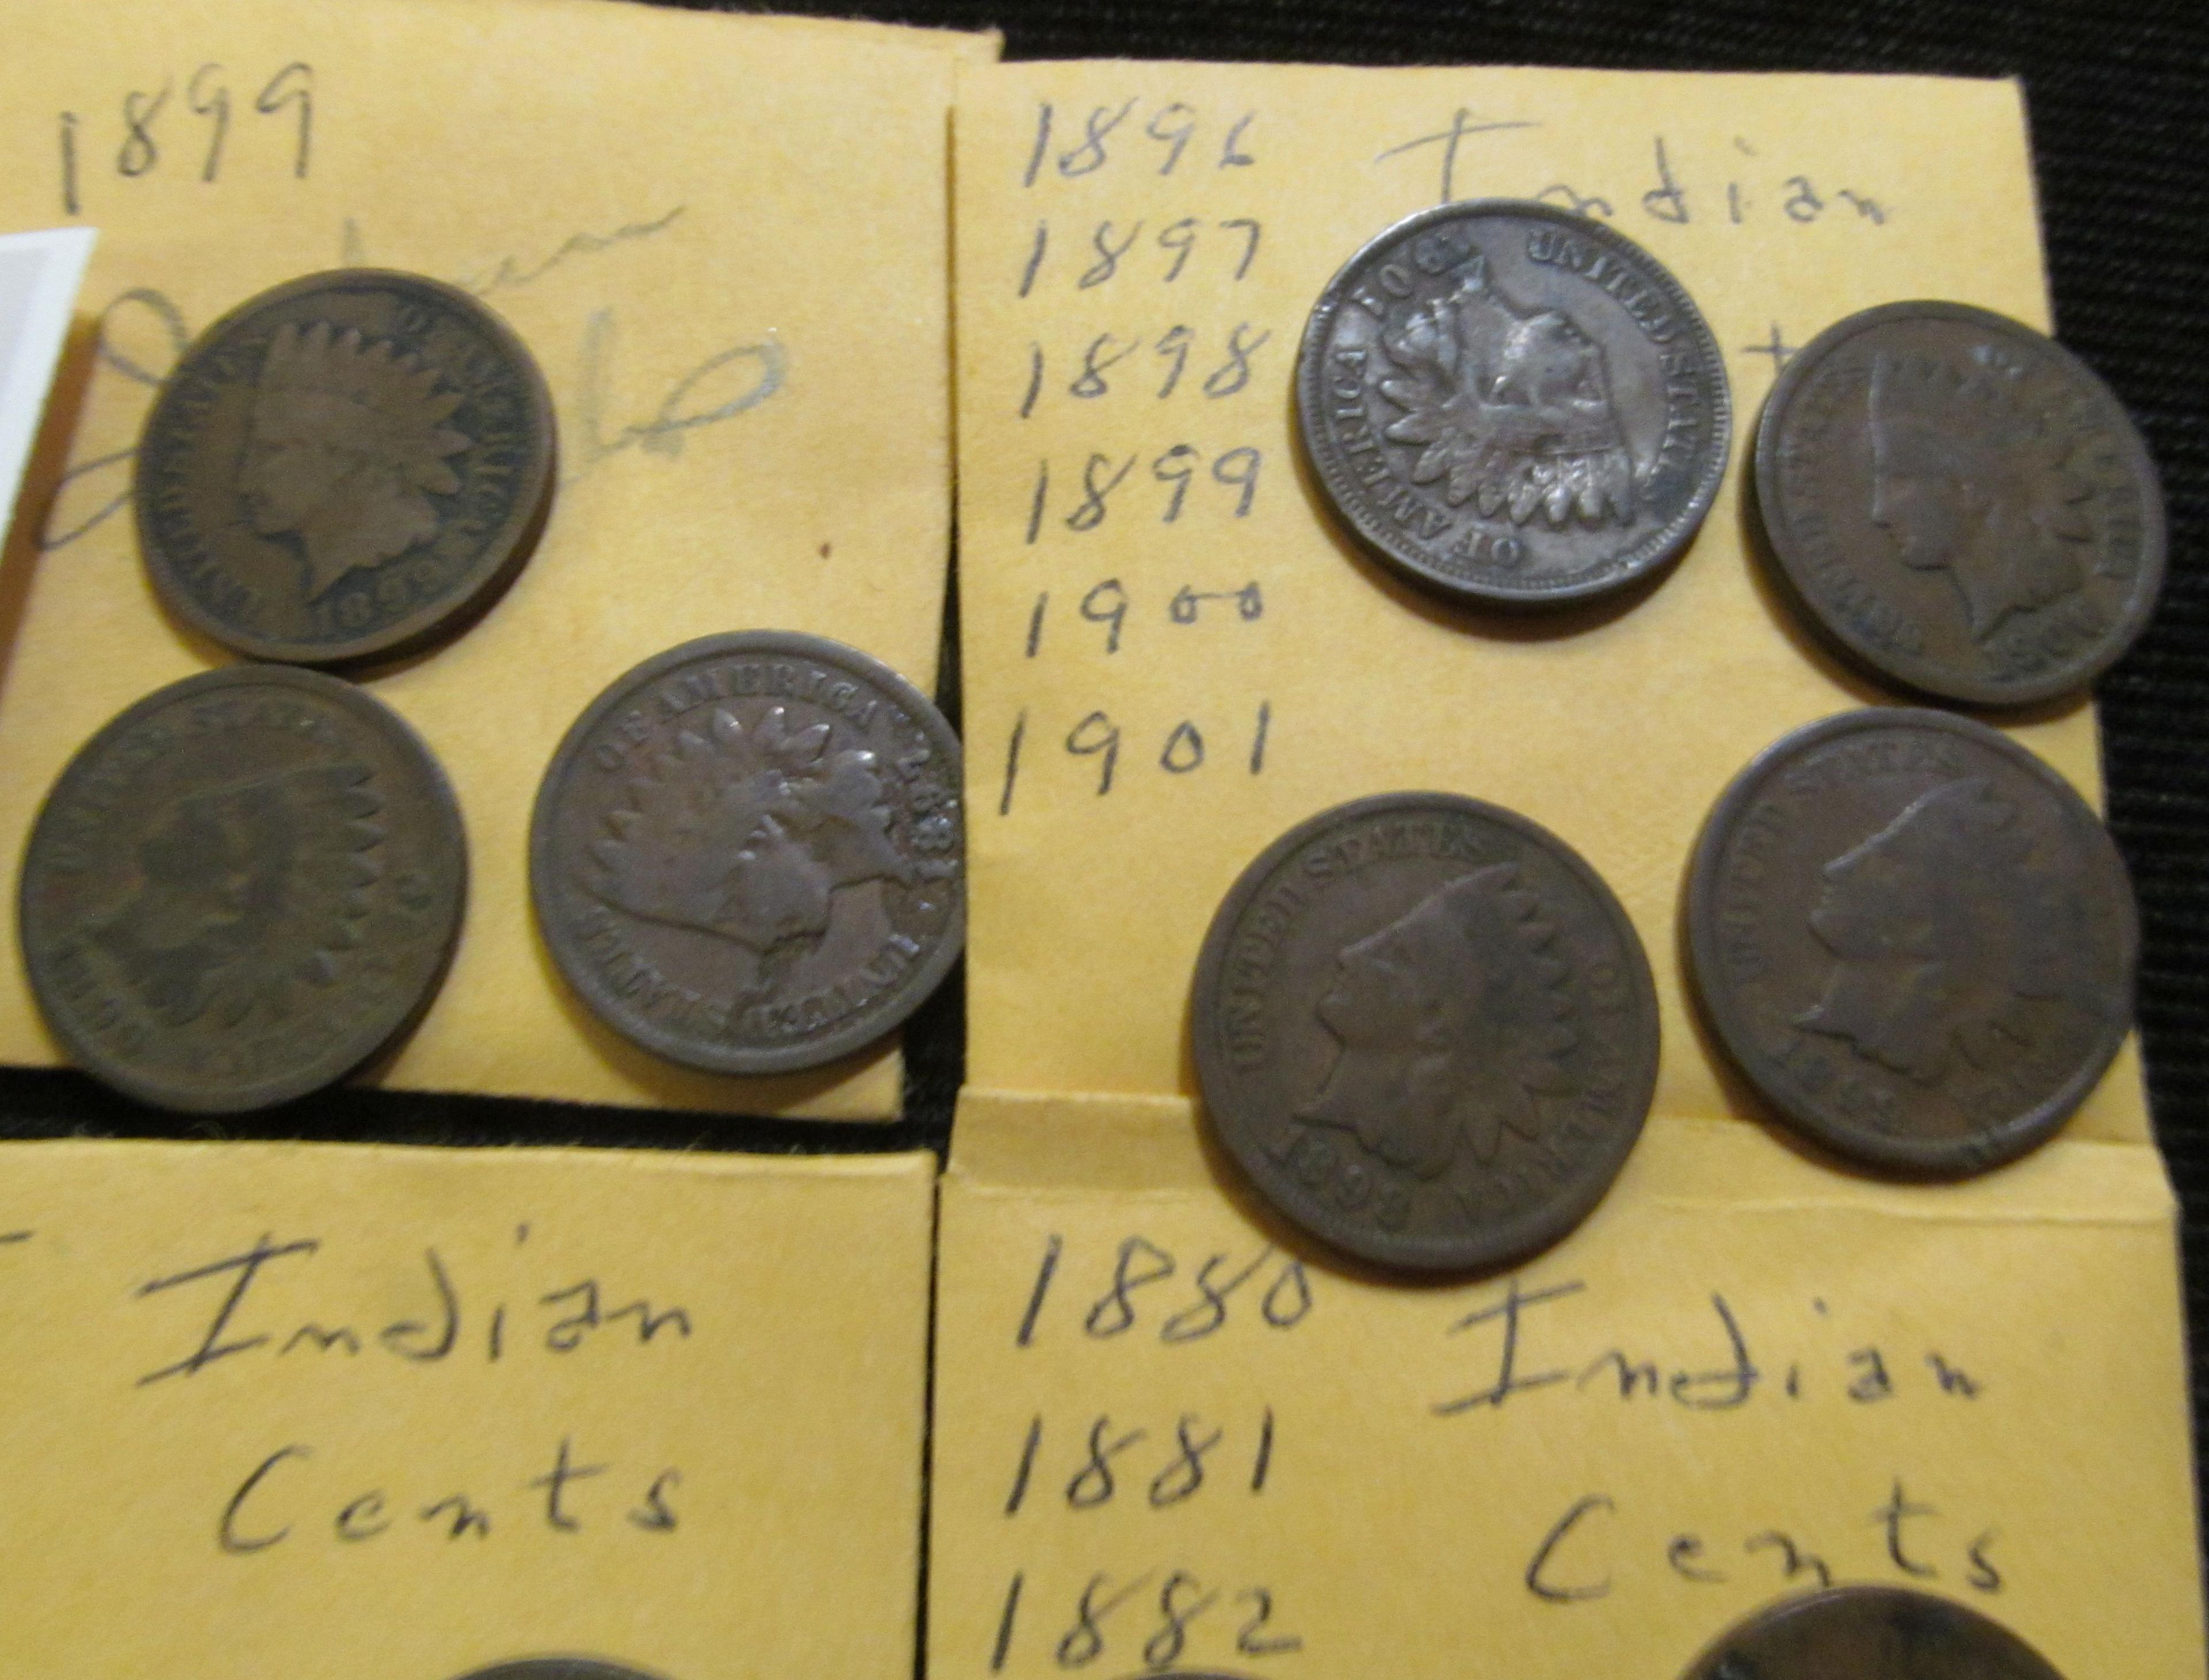 1865, 1866, 1879, 1880, 1881, 1882, 1896, 1897, 1898, 1899, 1900, & 1901 Indian Head Cents.